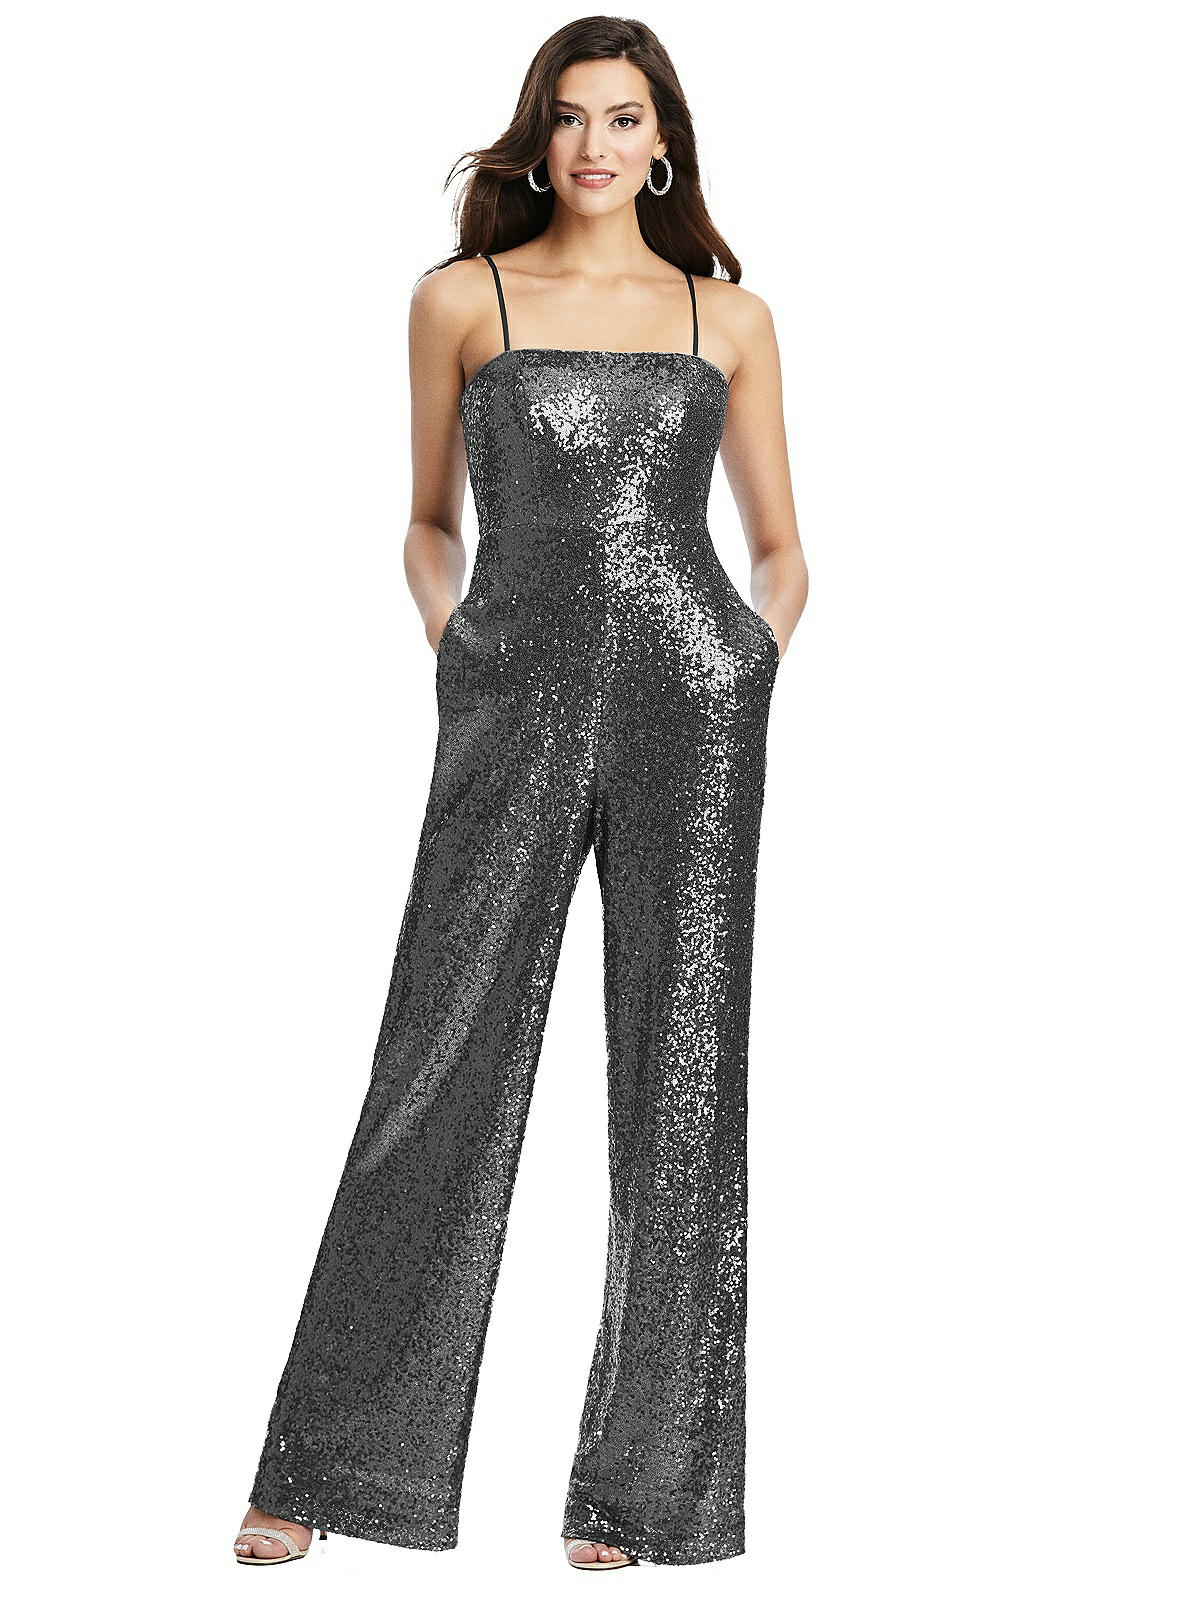 Julycc Womens Sequin Jumpsuit Sleeveless Wide Leg Formal Evening Party  Playsuit Pants 